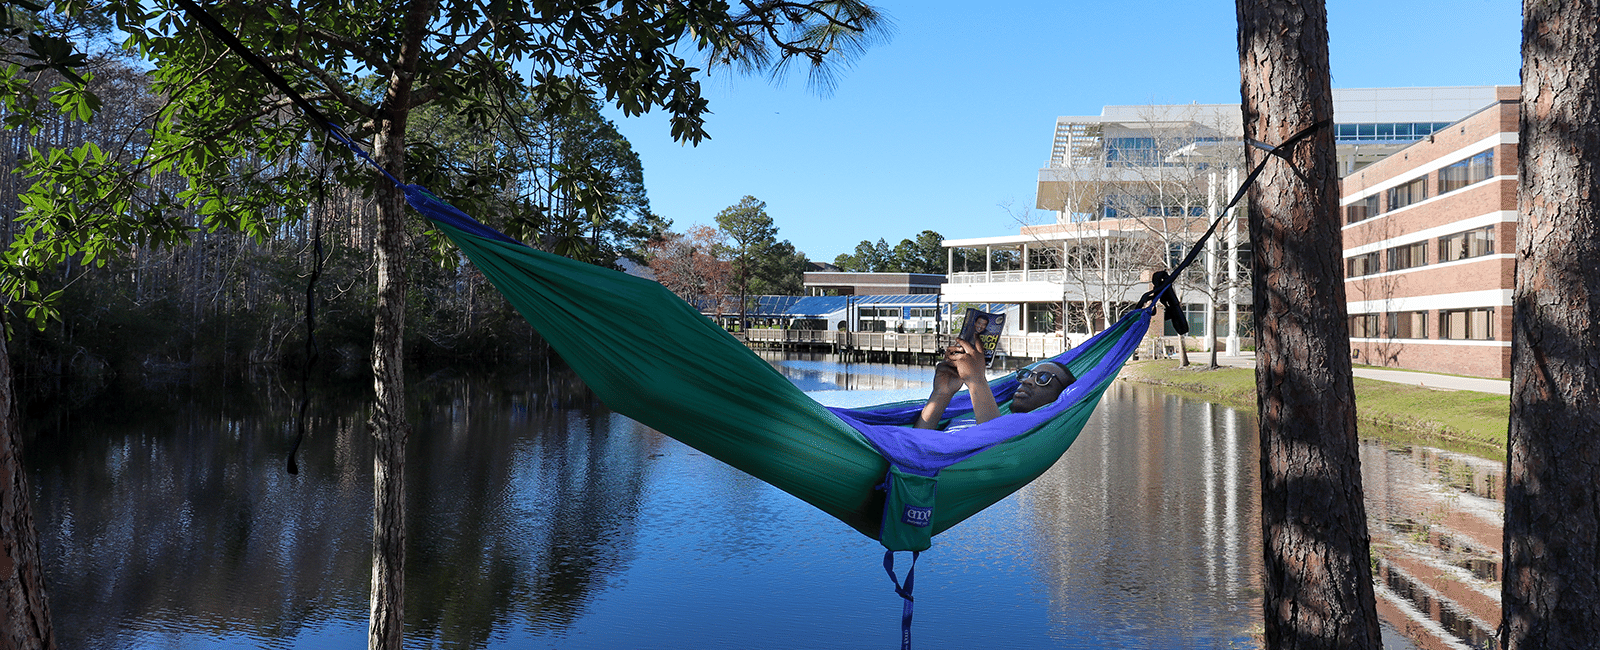 male resident in hammock in housing area with lake in background